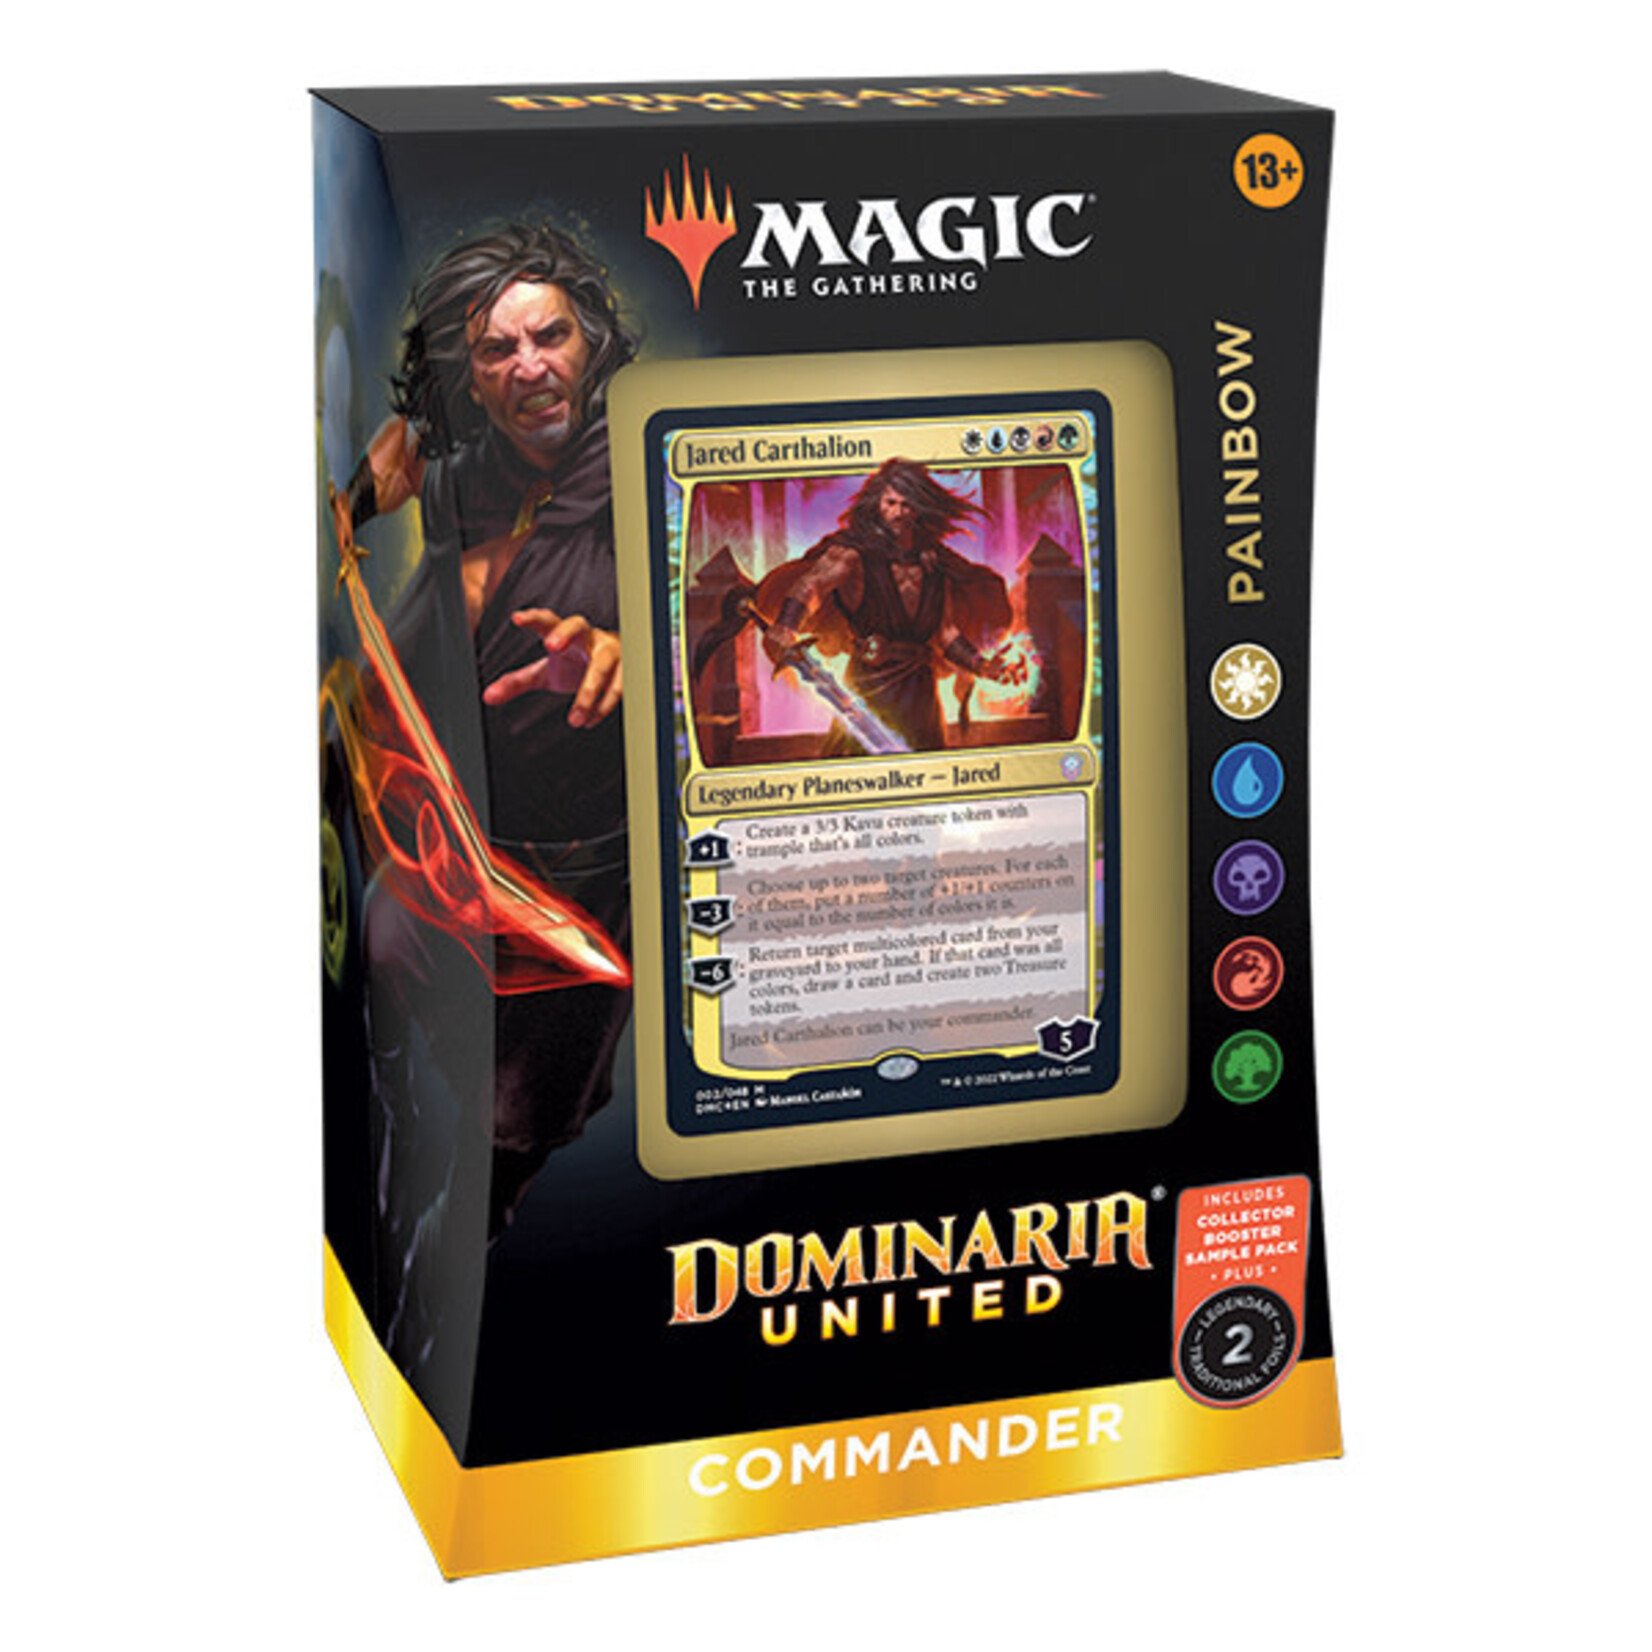 Wizards of the Coast Magic - Dominaria United Commander Deck "Painbow" White / Blue / Black / Red / Green